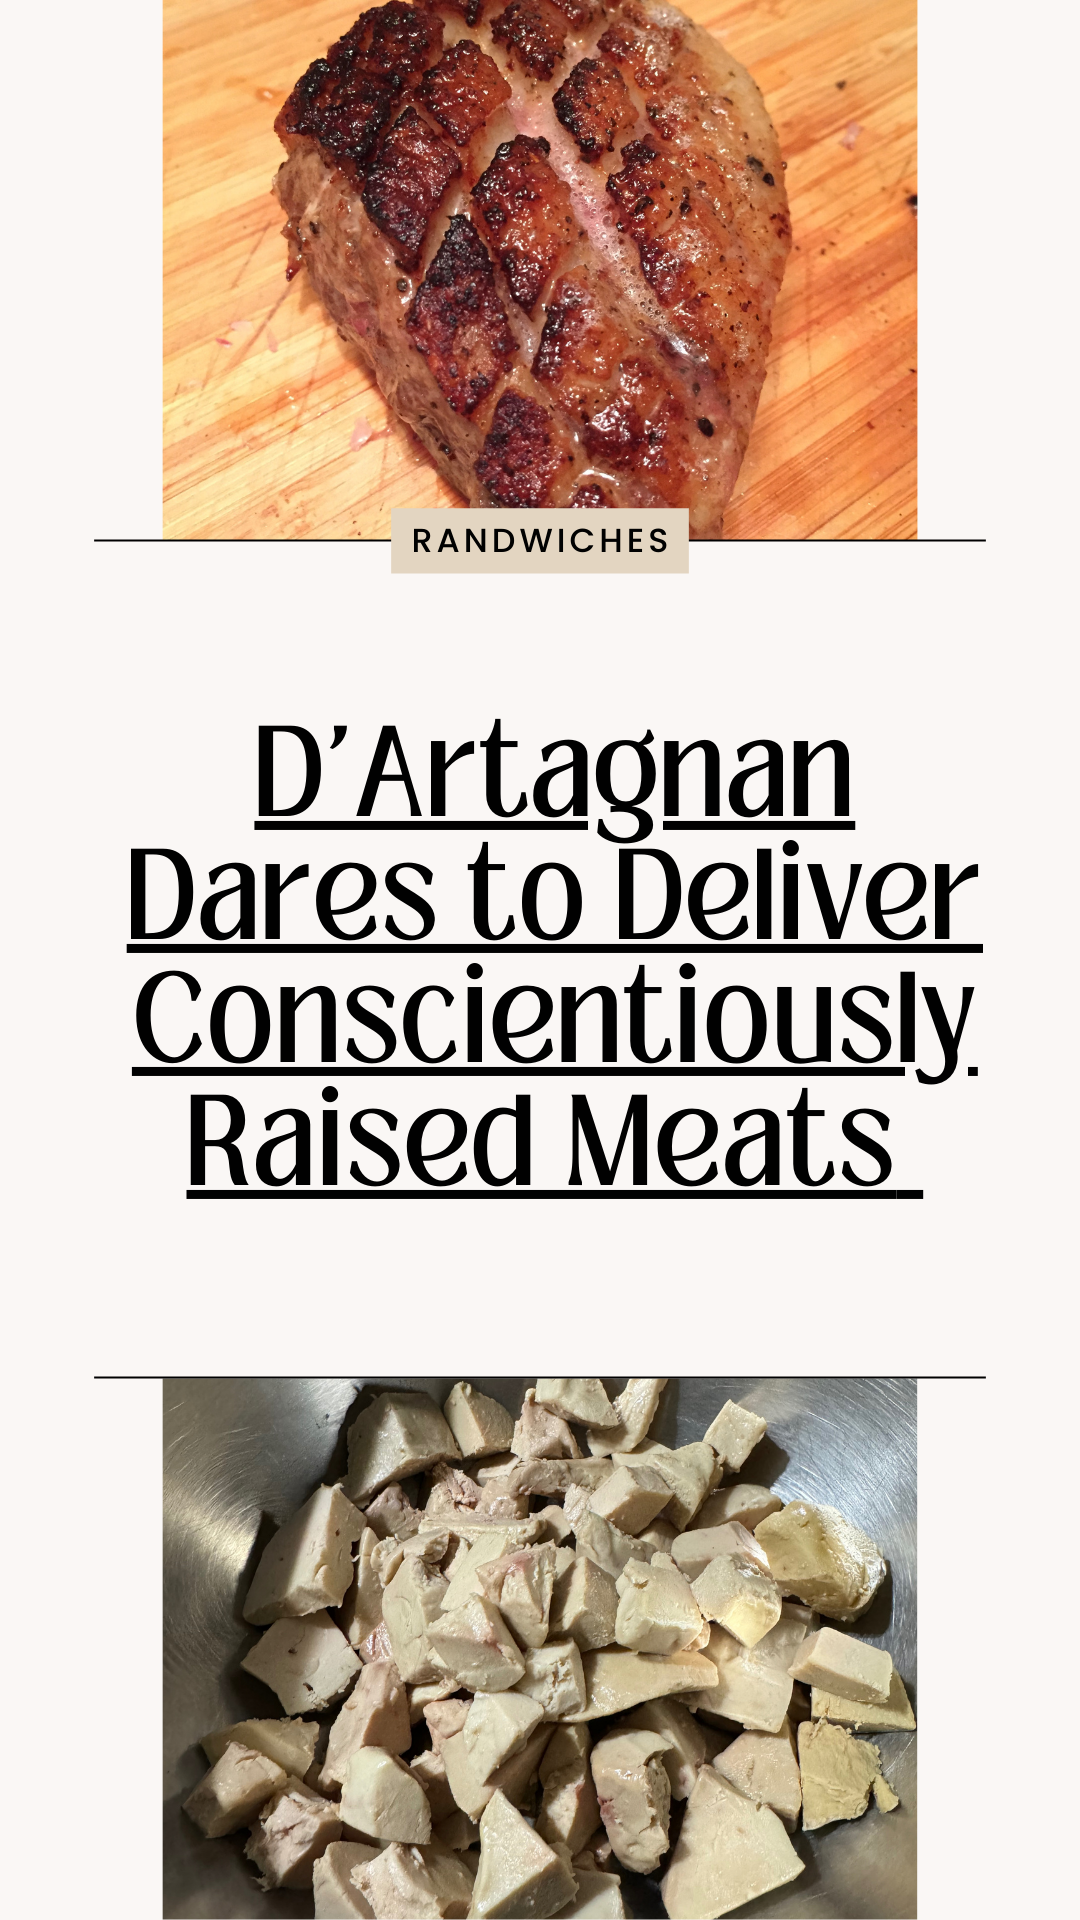 D'Artagnan Dares to Deliver Conscientiously Raised Meats & Delicious Farm to Fork Goods - AD